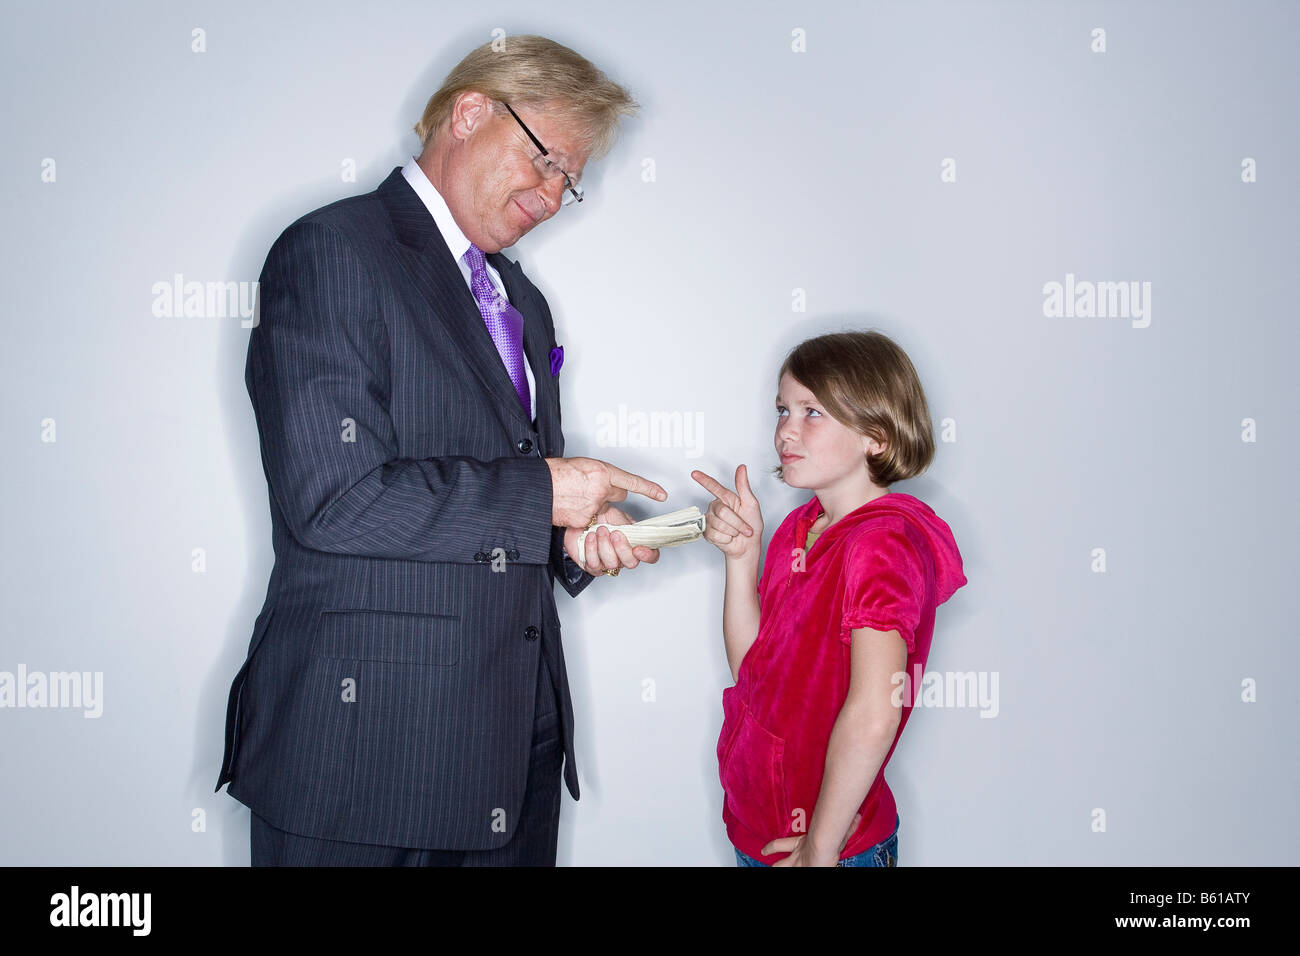 Business man in a suit and tie about to give cash money to a  9 year old girl in a bright pink shirt. Stock Photo